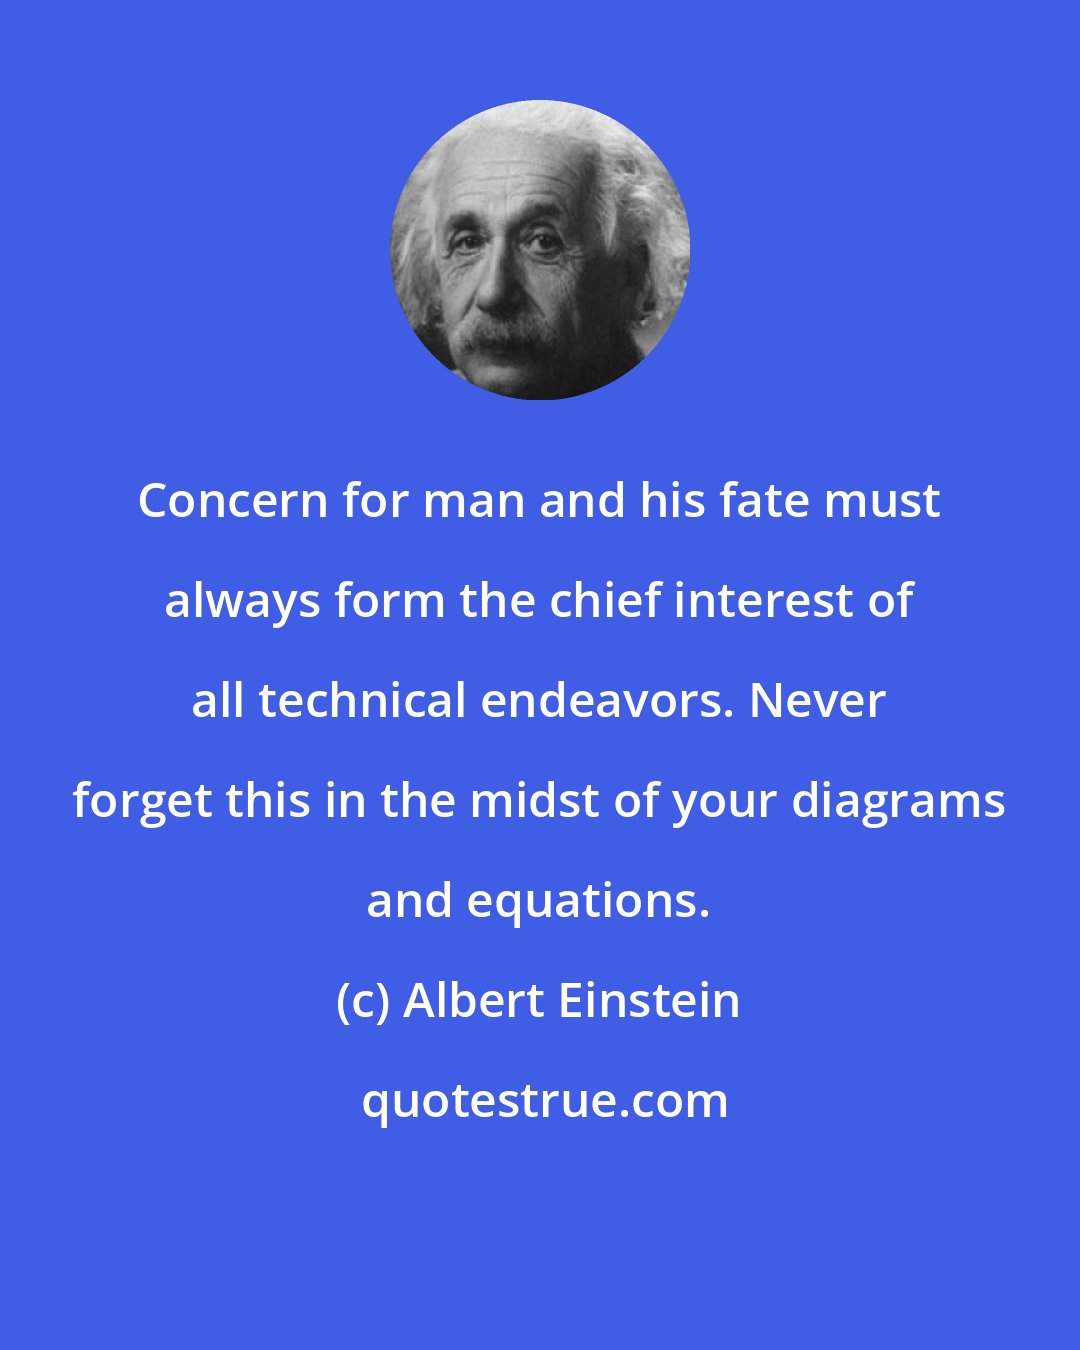 Albert Einstein: Concern for man and his fate must always form the chief interest of all technical endeavors. Never forget this in the midst of your diagrams and equations.